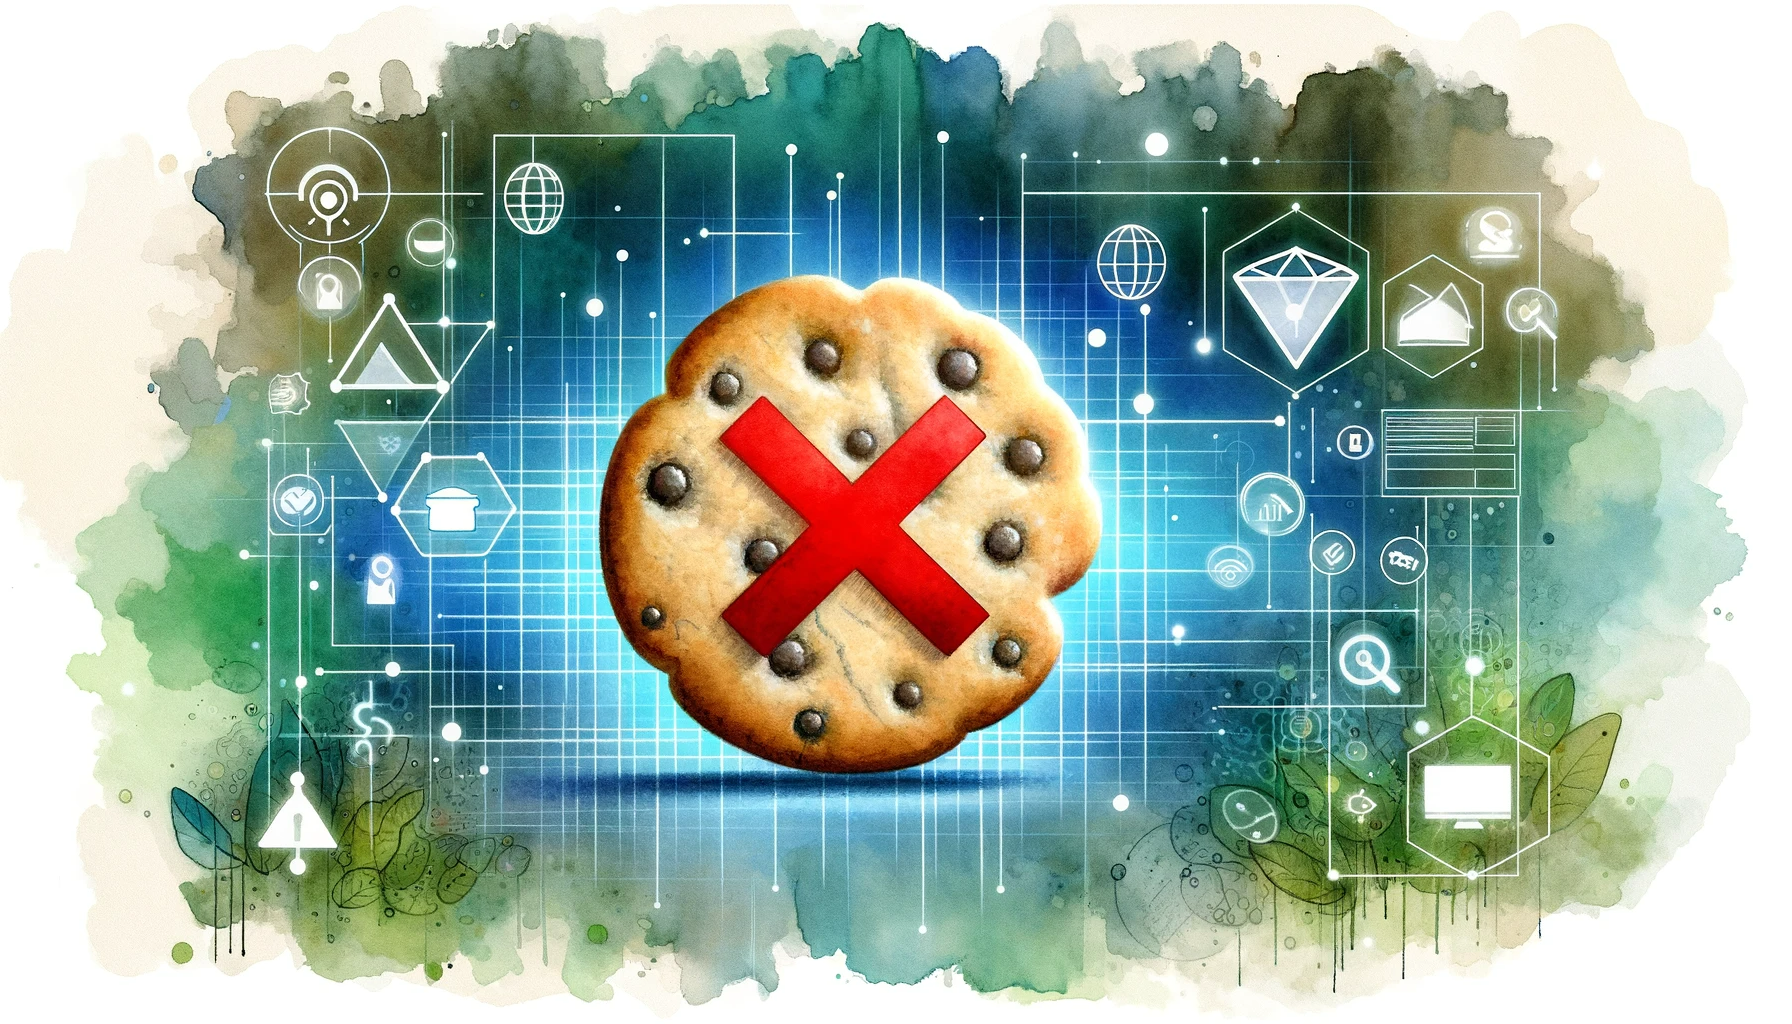 Navigating the Post-Cookie Era with HubSpot